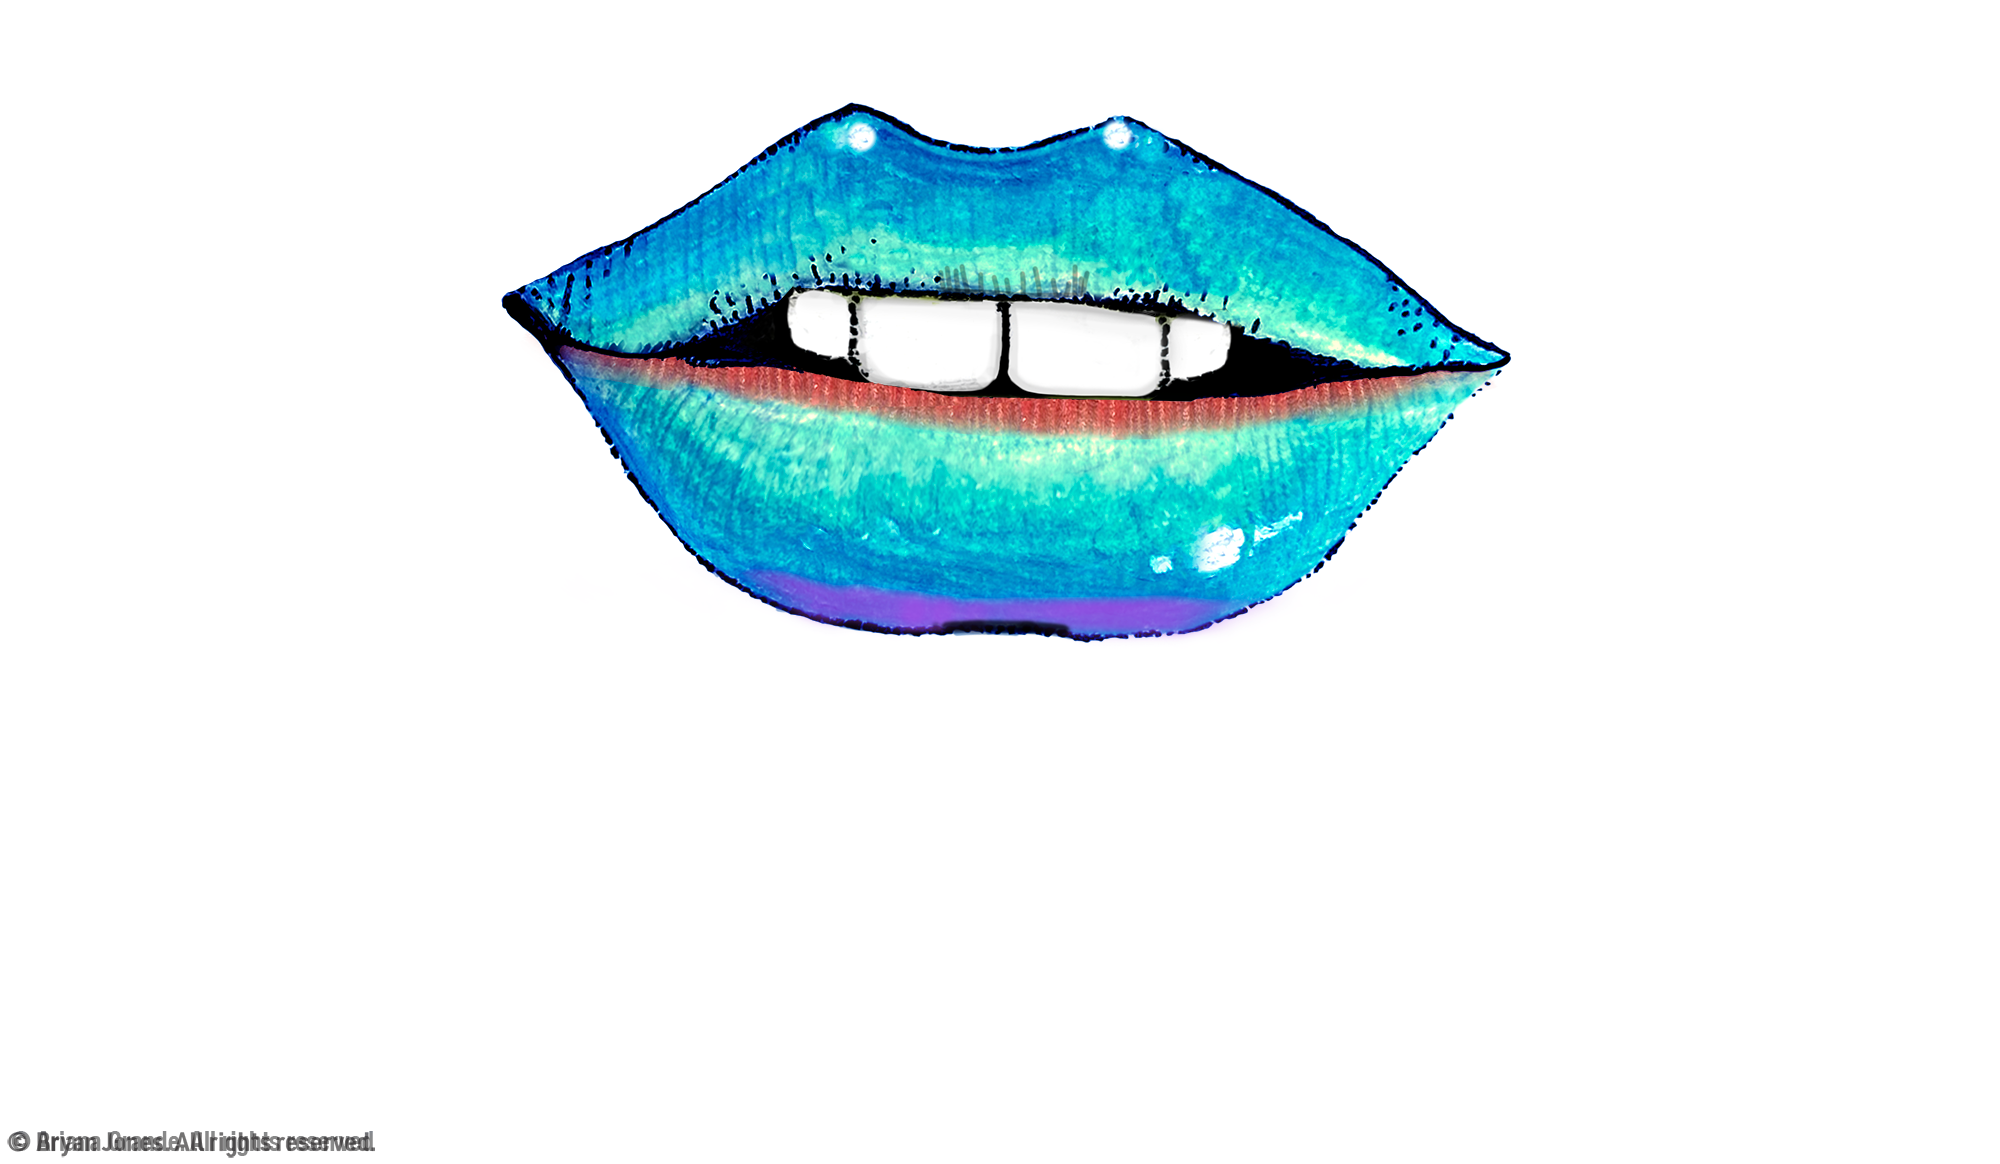 Lips styled with blue to red gradient. blue representing protons and red electrons.